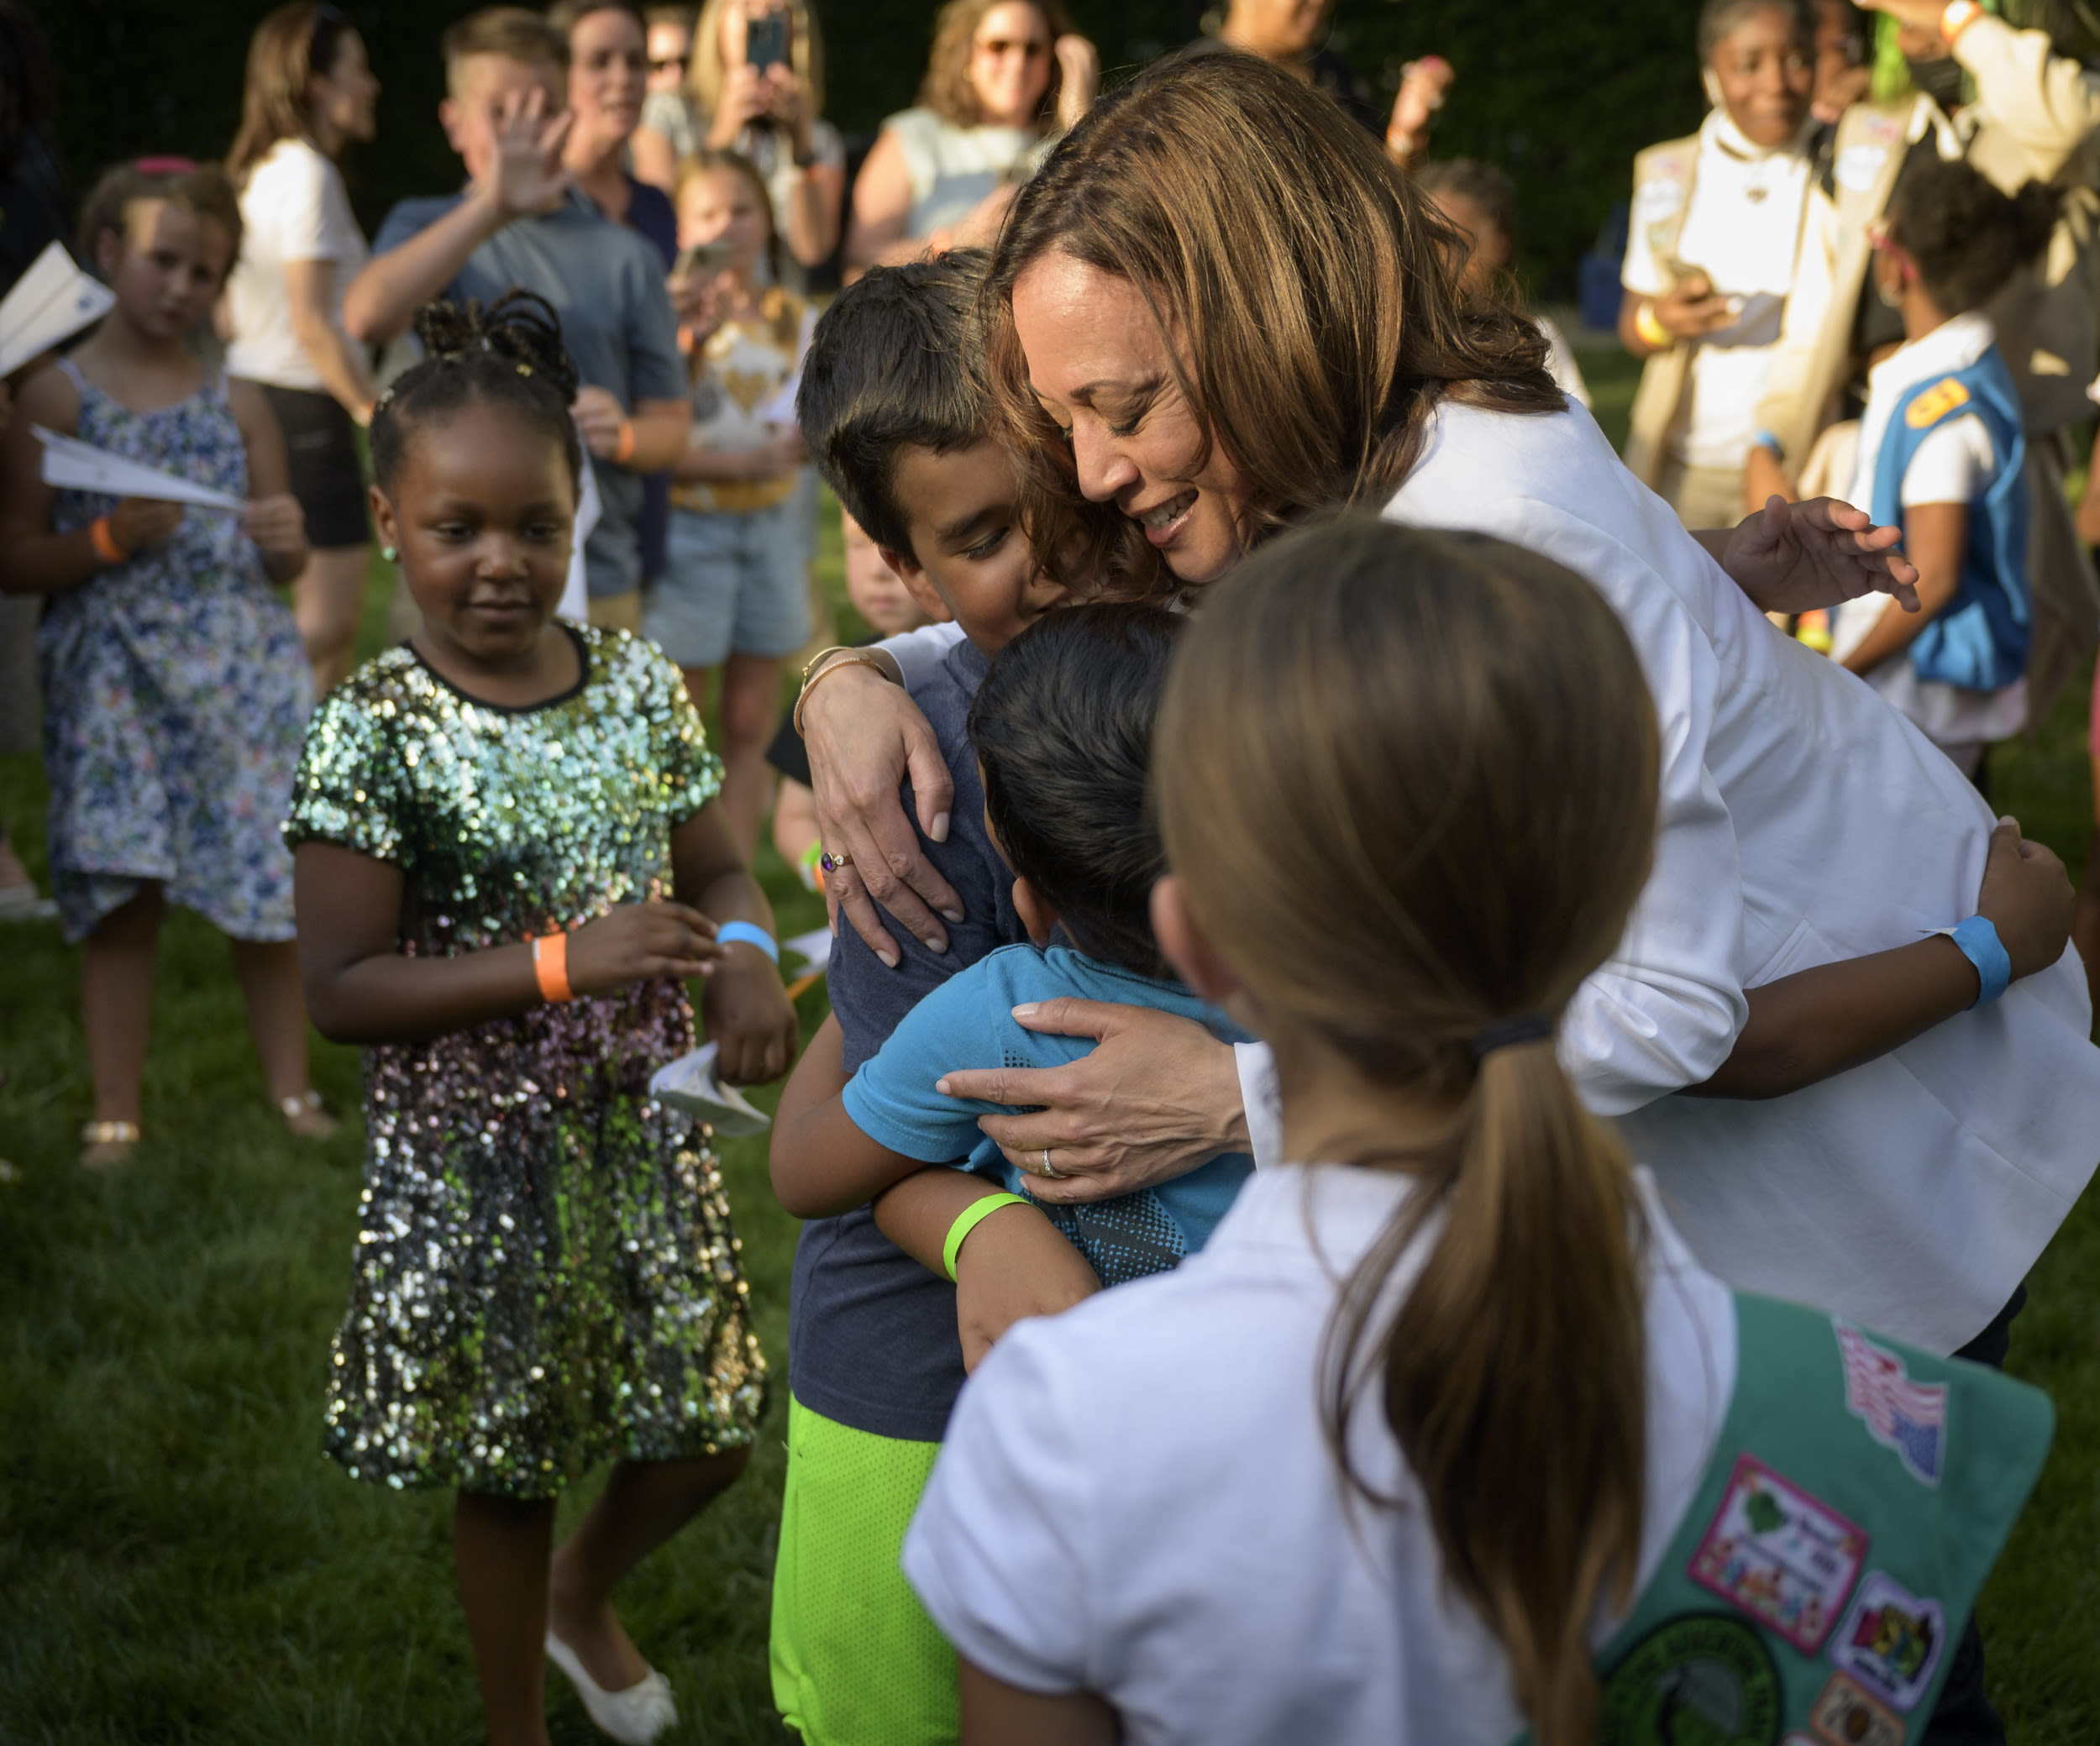 Kamala Harris attacked for not having children sparks outrage